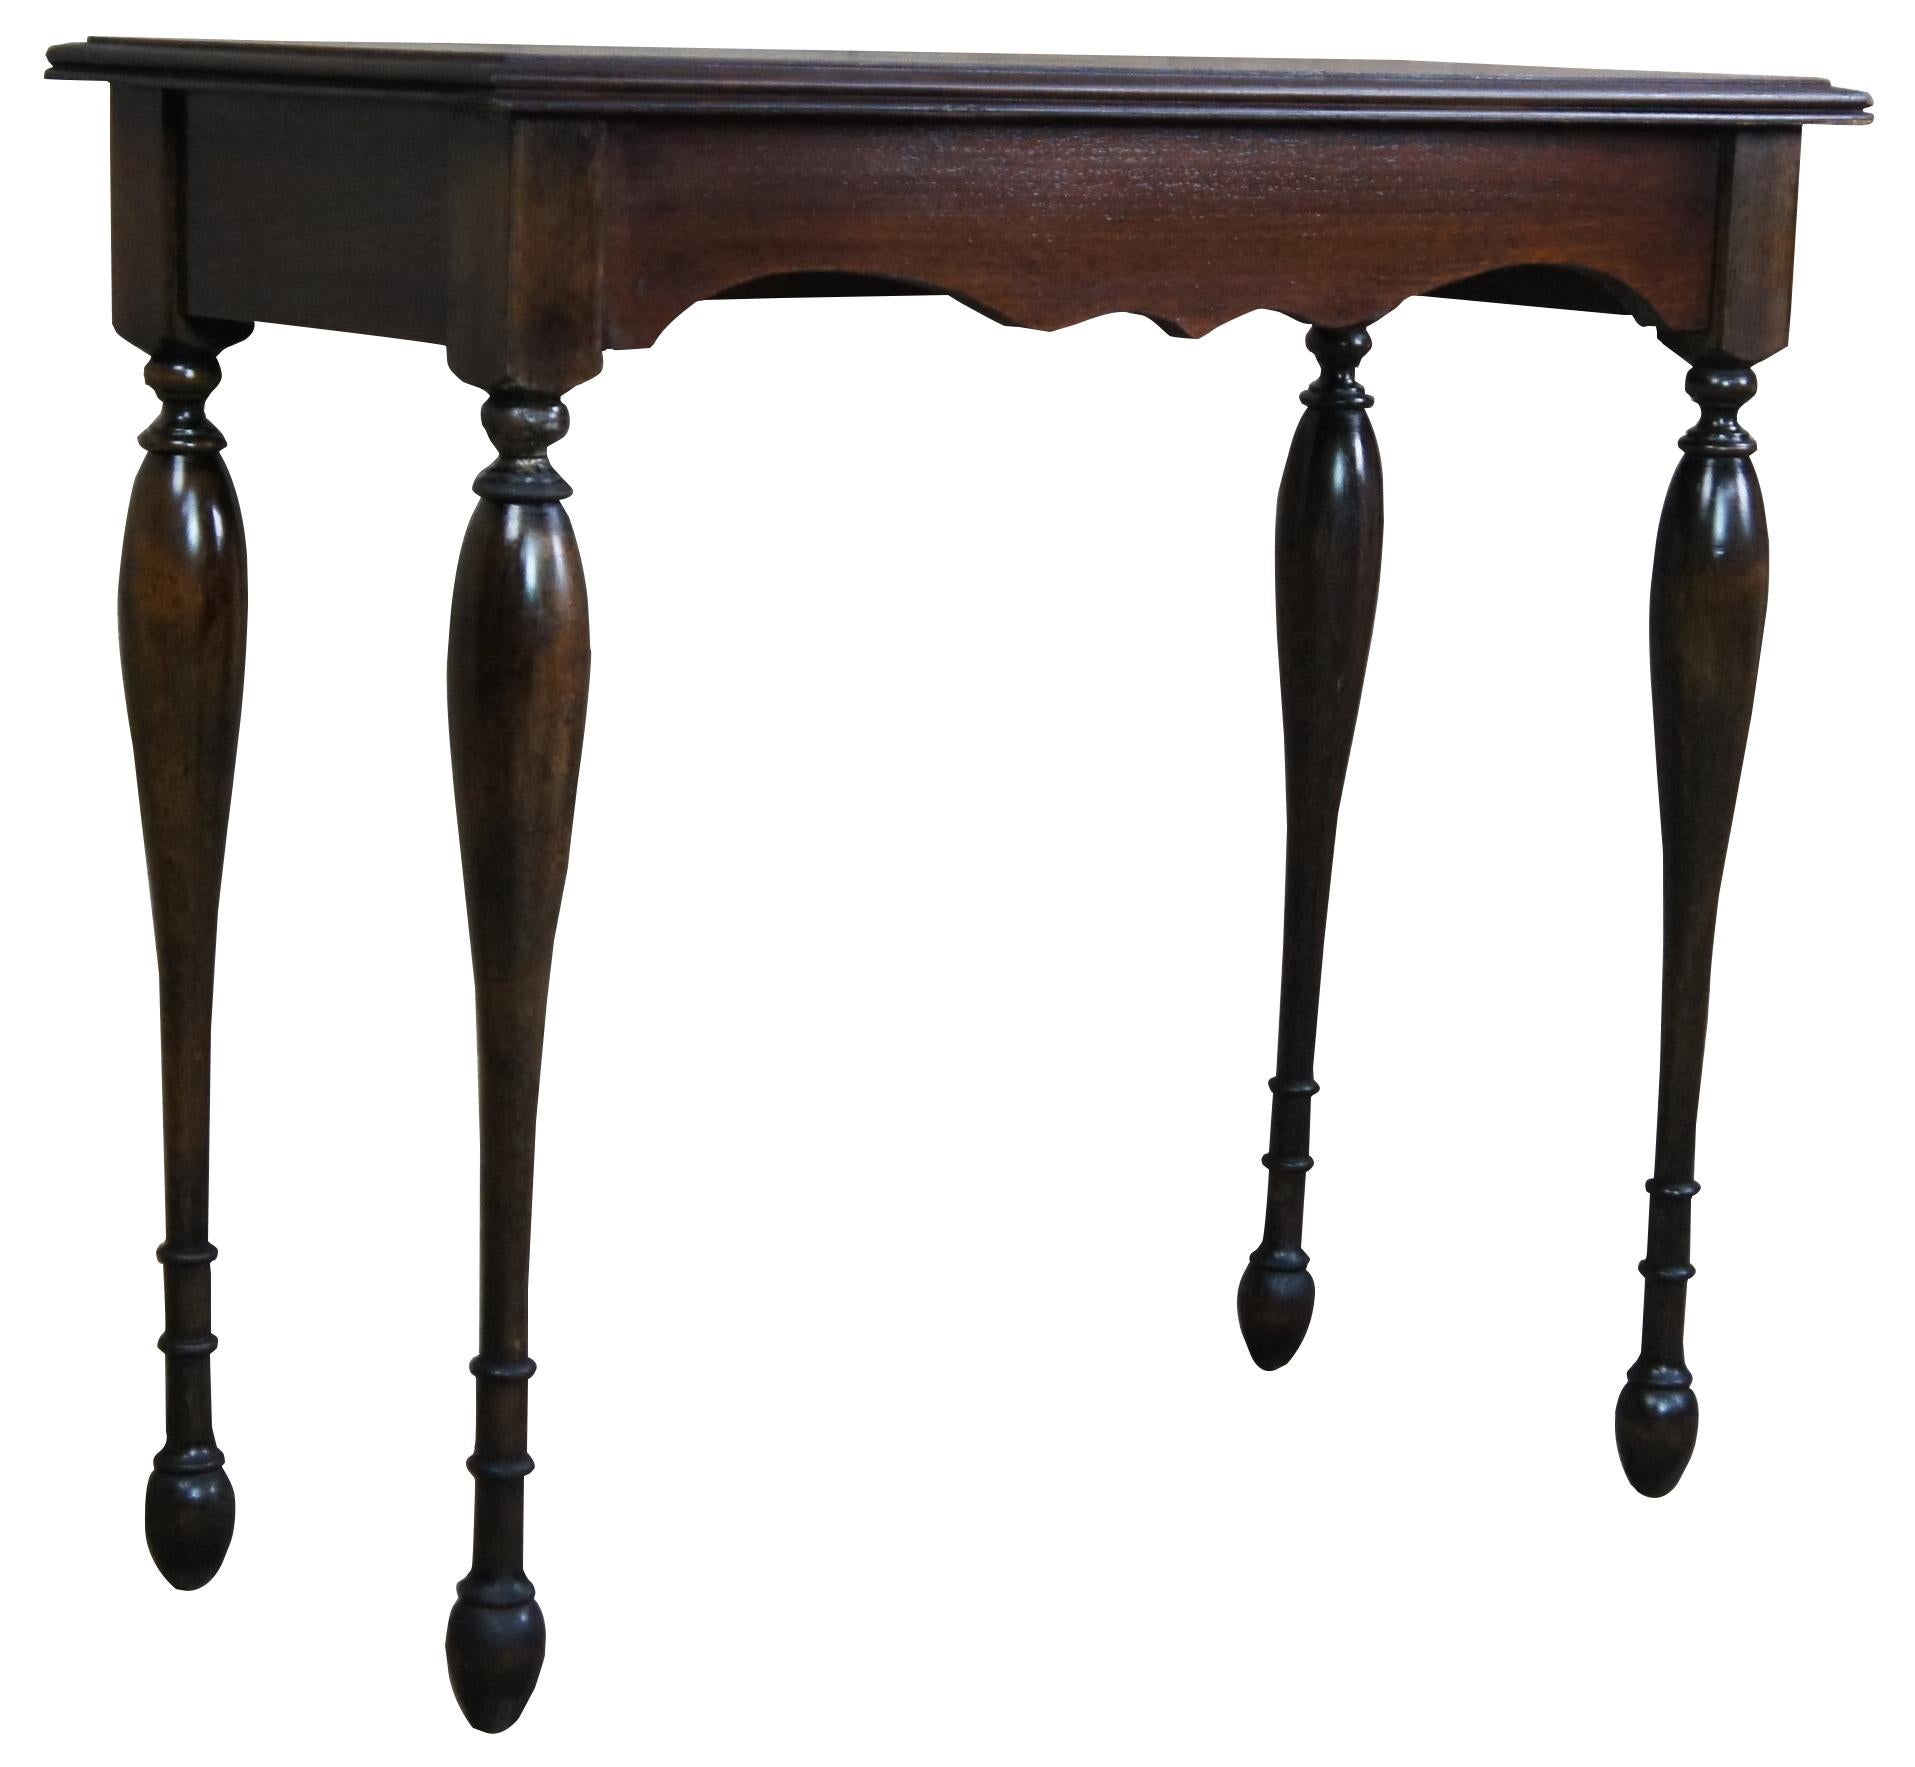 Early 20th century Walnut hall table. A rectangular form with serpentine cut apron over pin shaped ribbed legs leading to bun feet. Measures: 30